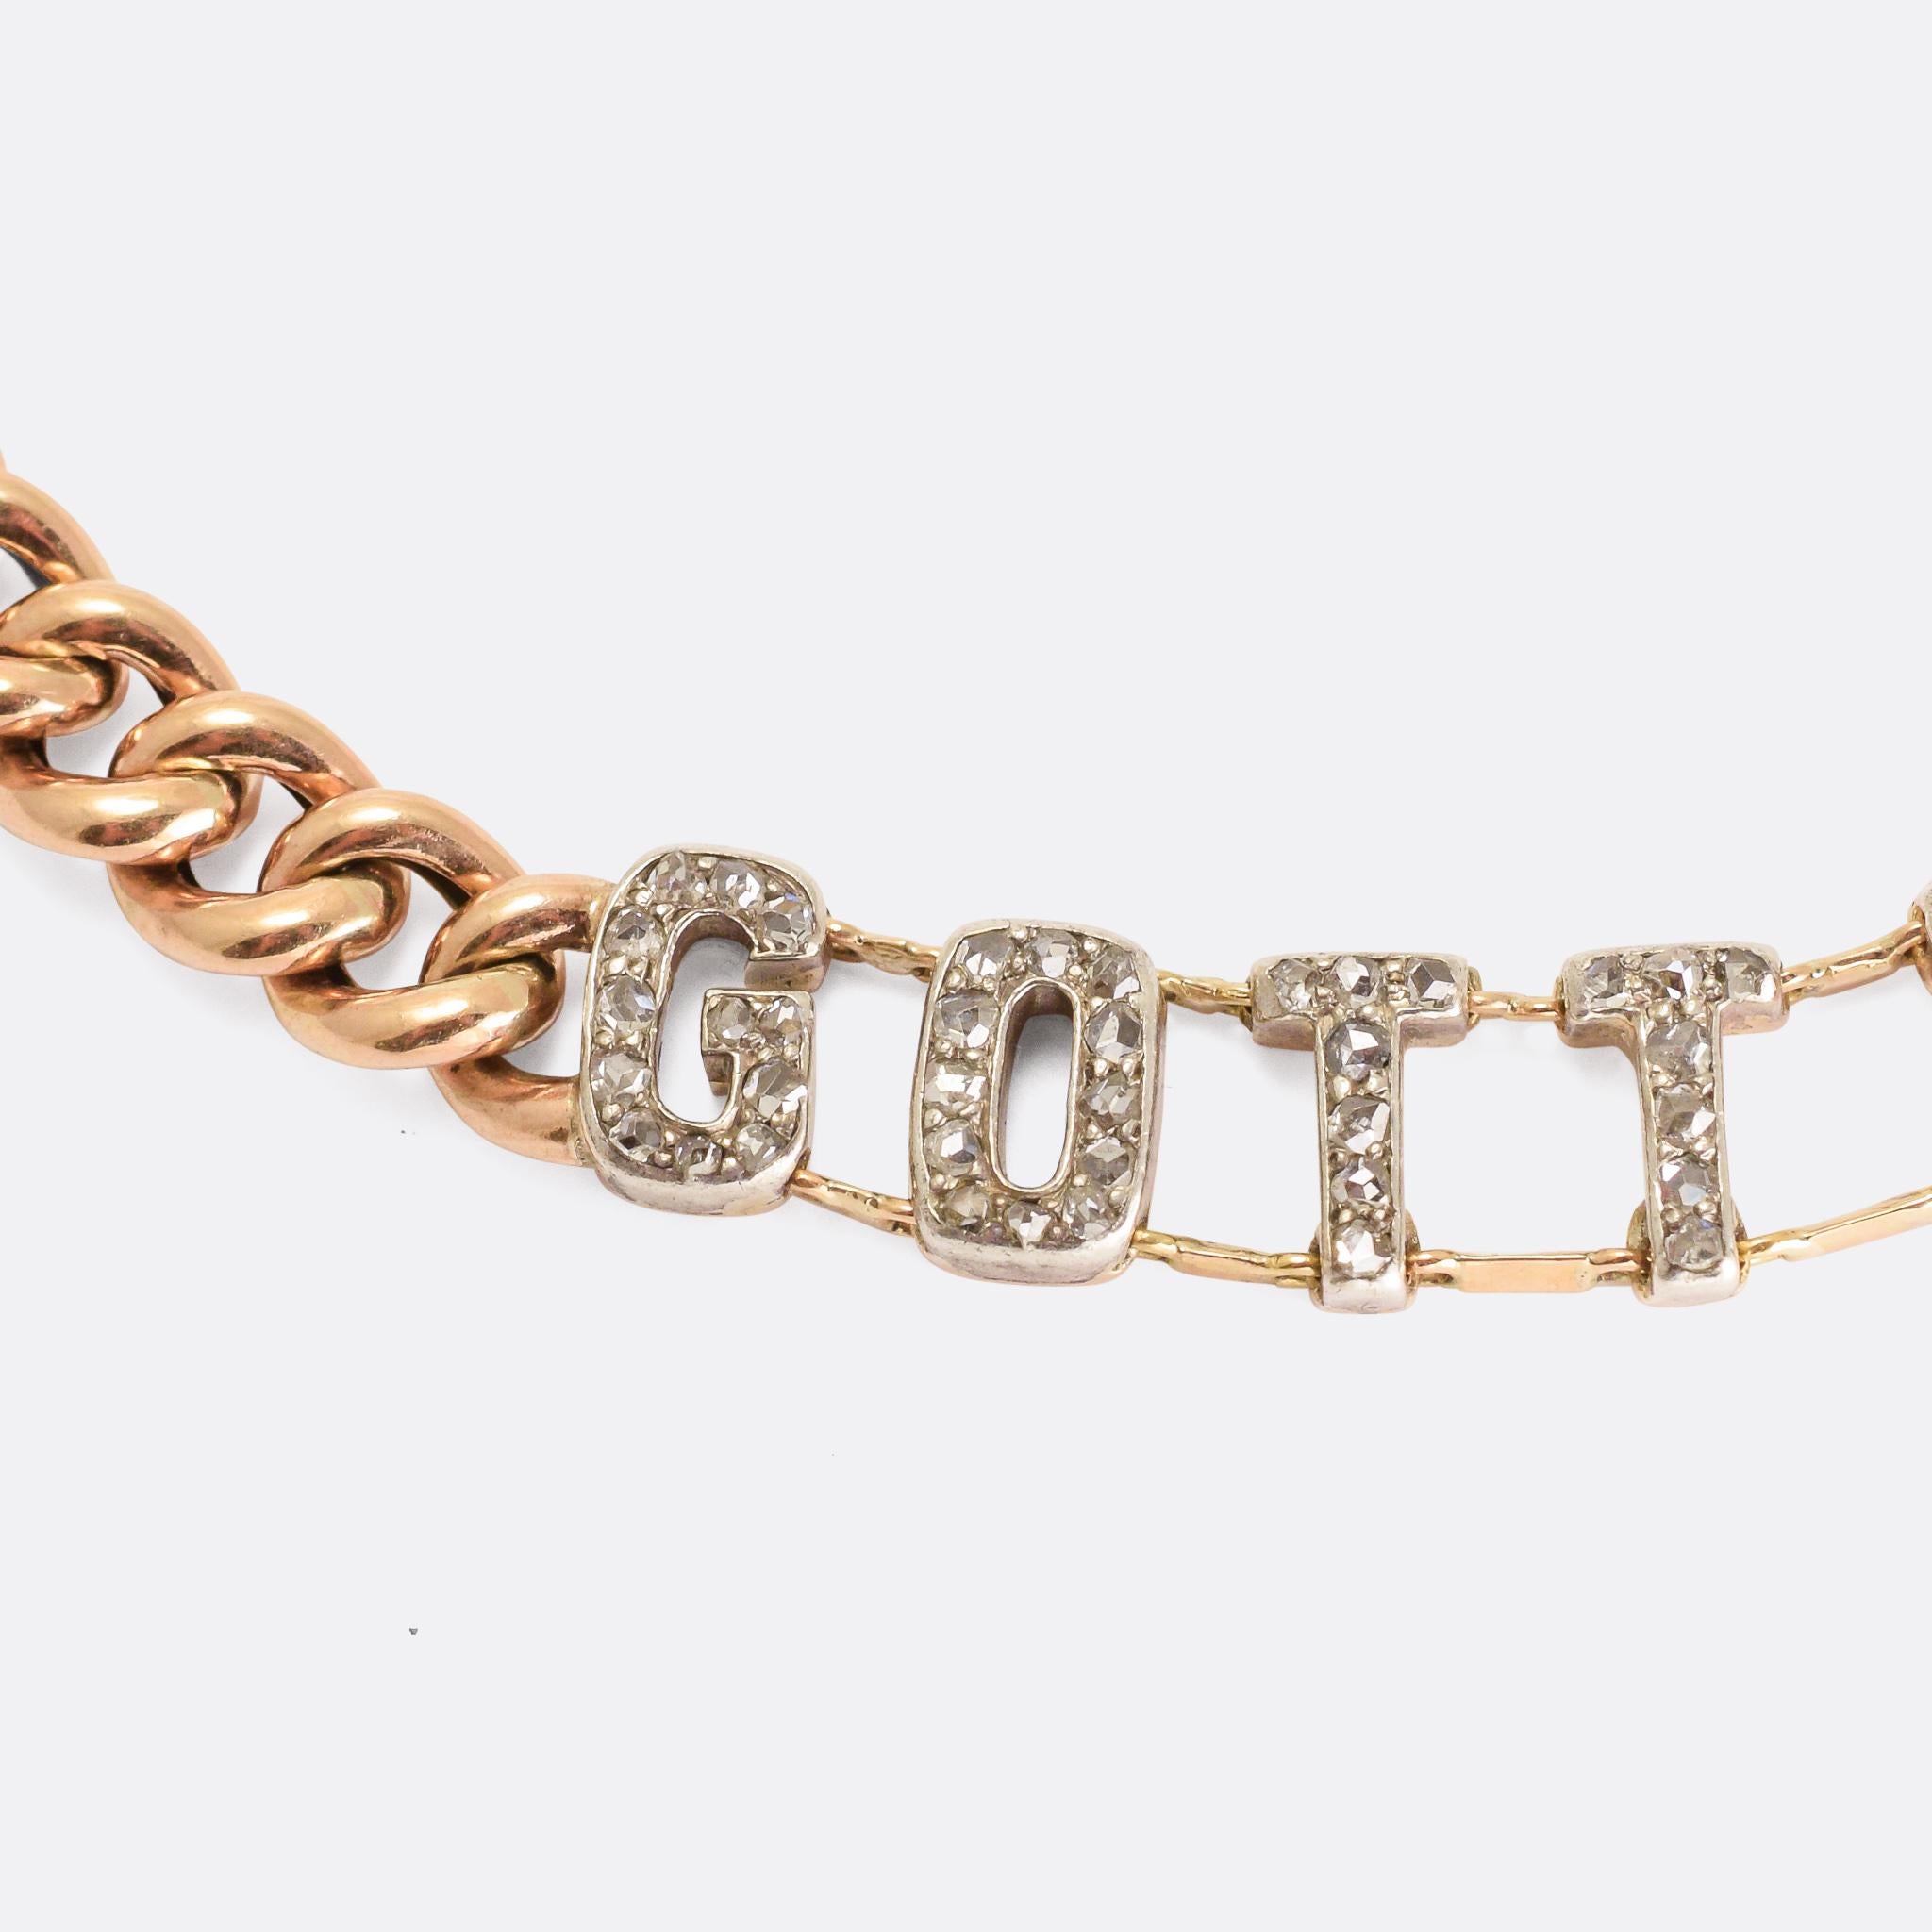 An excellent antique curb-link necklace featuring the diamond-set words GOT MIT DIR, German for God Be With You! It was made in England in the latter half of the 19th Century, circa 1880, modelled in 9 karat gold throughout.

STONES
Rose cut